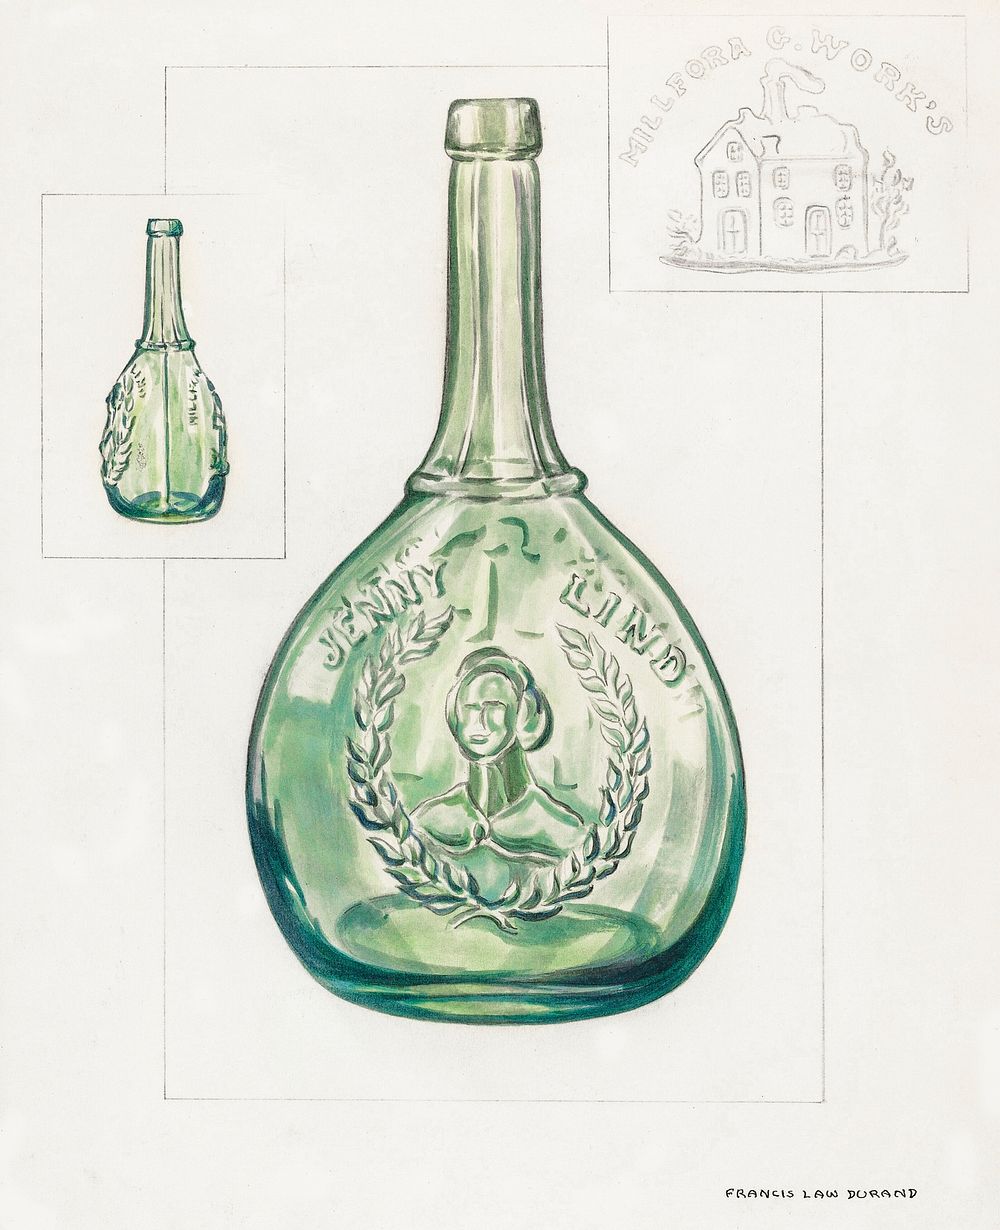 Bottle (1935&ndash;1942) by Francis Law Durand. Original from The National Galley of Art. Digitally enhanced by rawpixel.